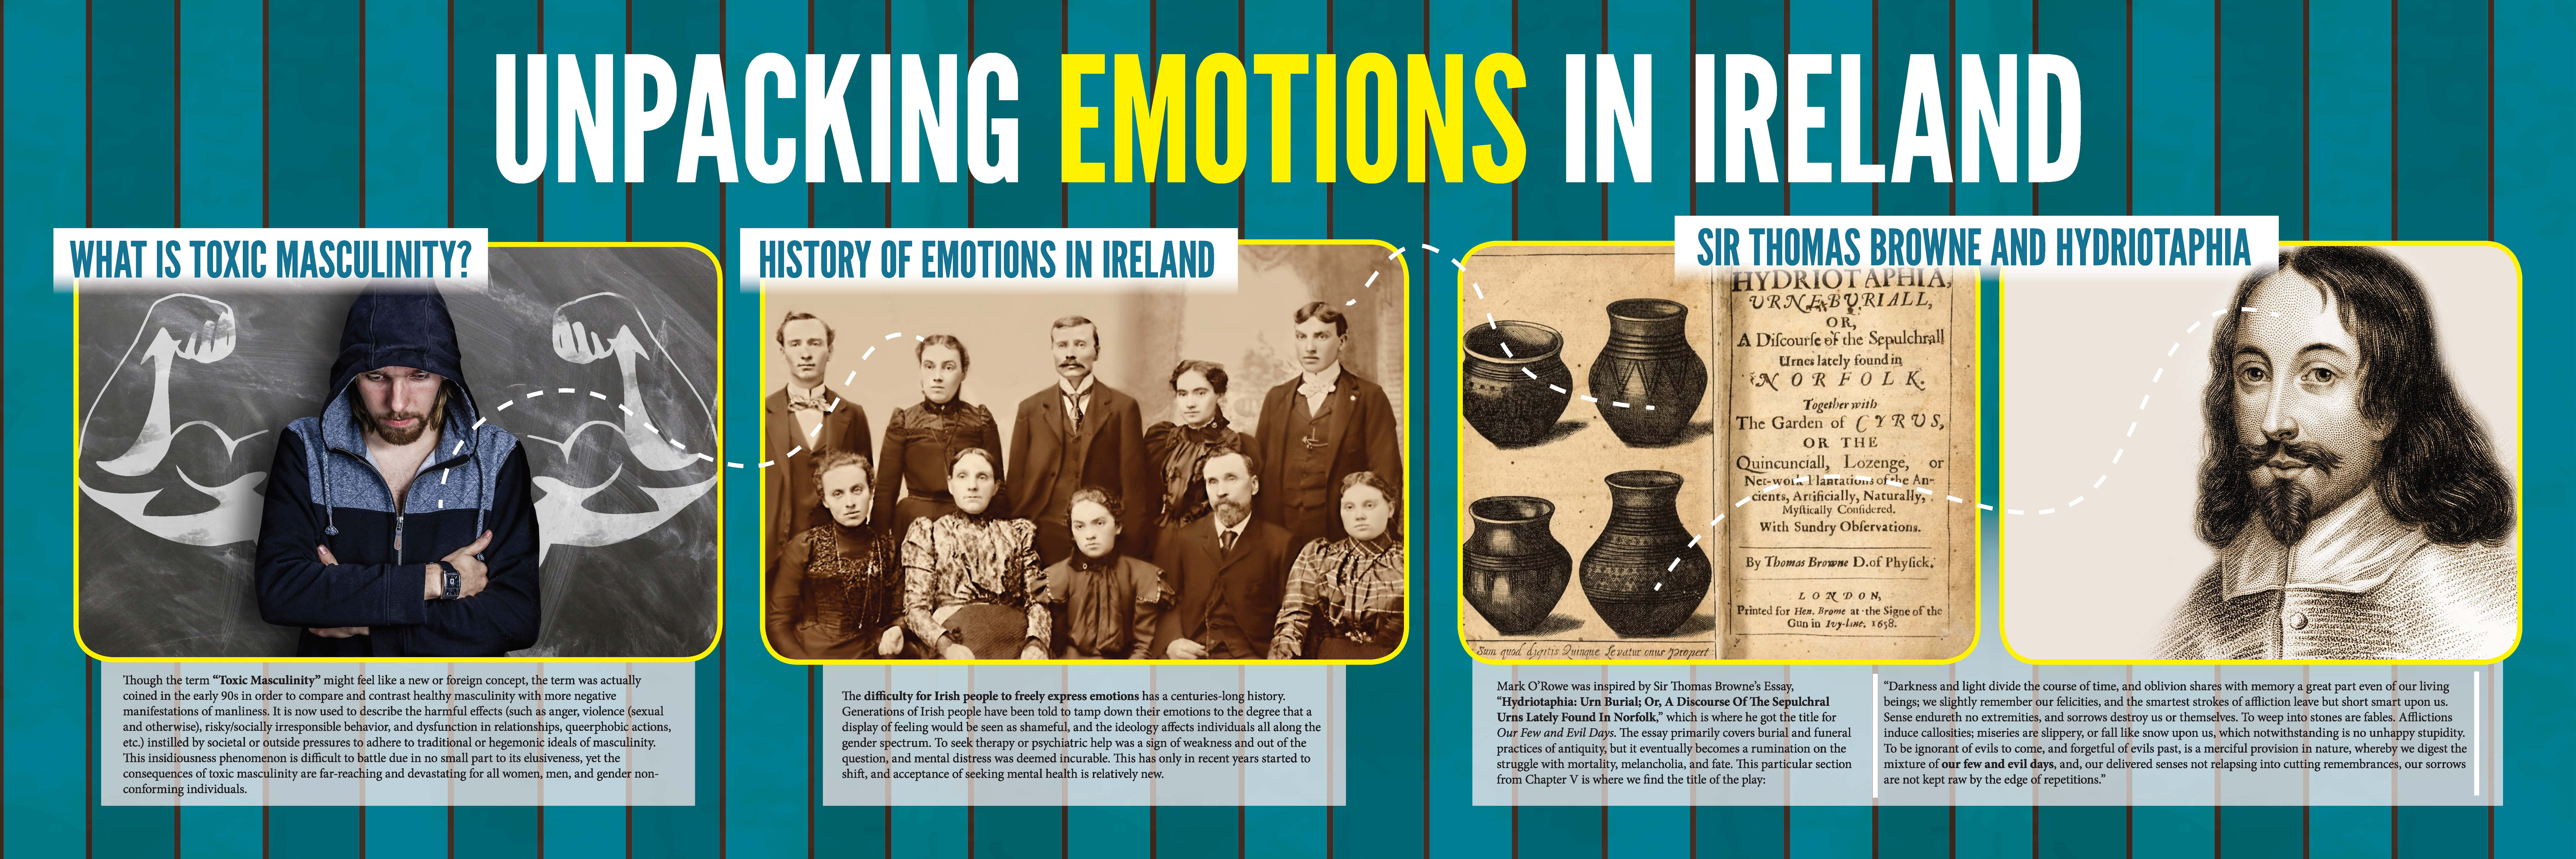 Unpacking Emotions in Ireland Infographic